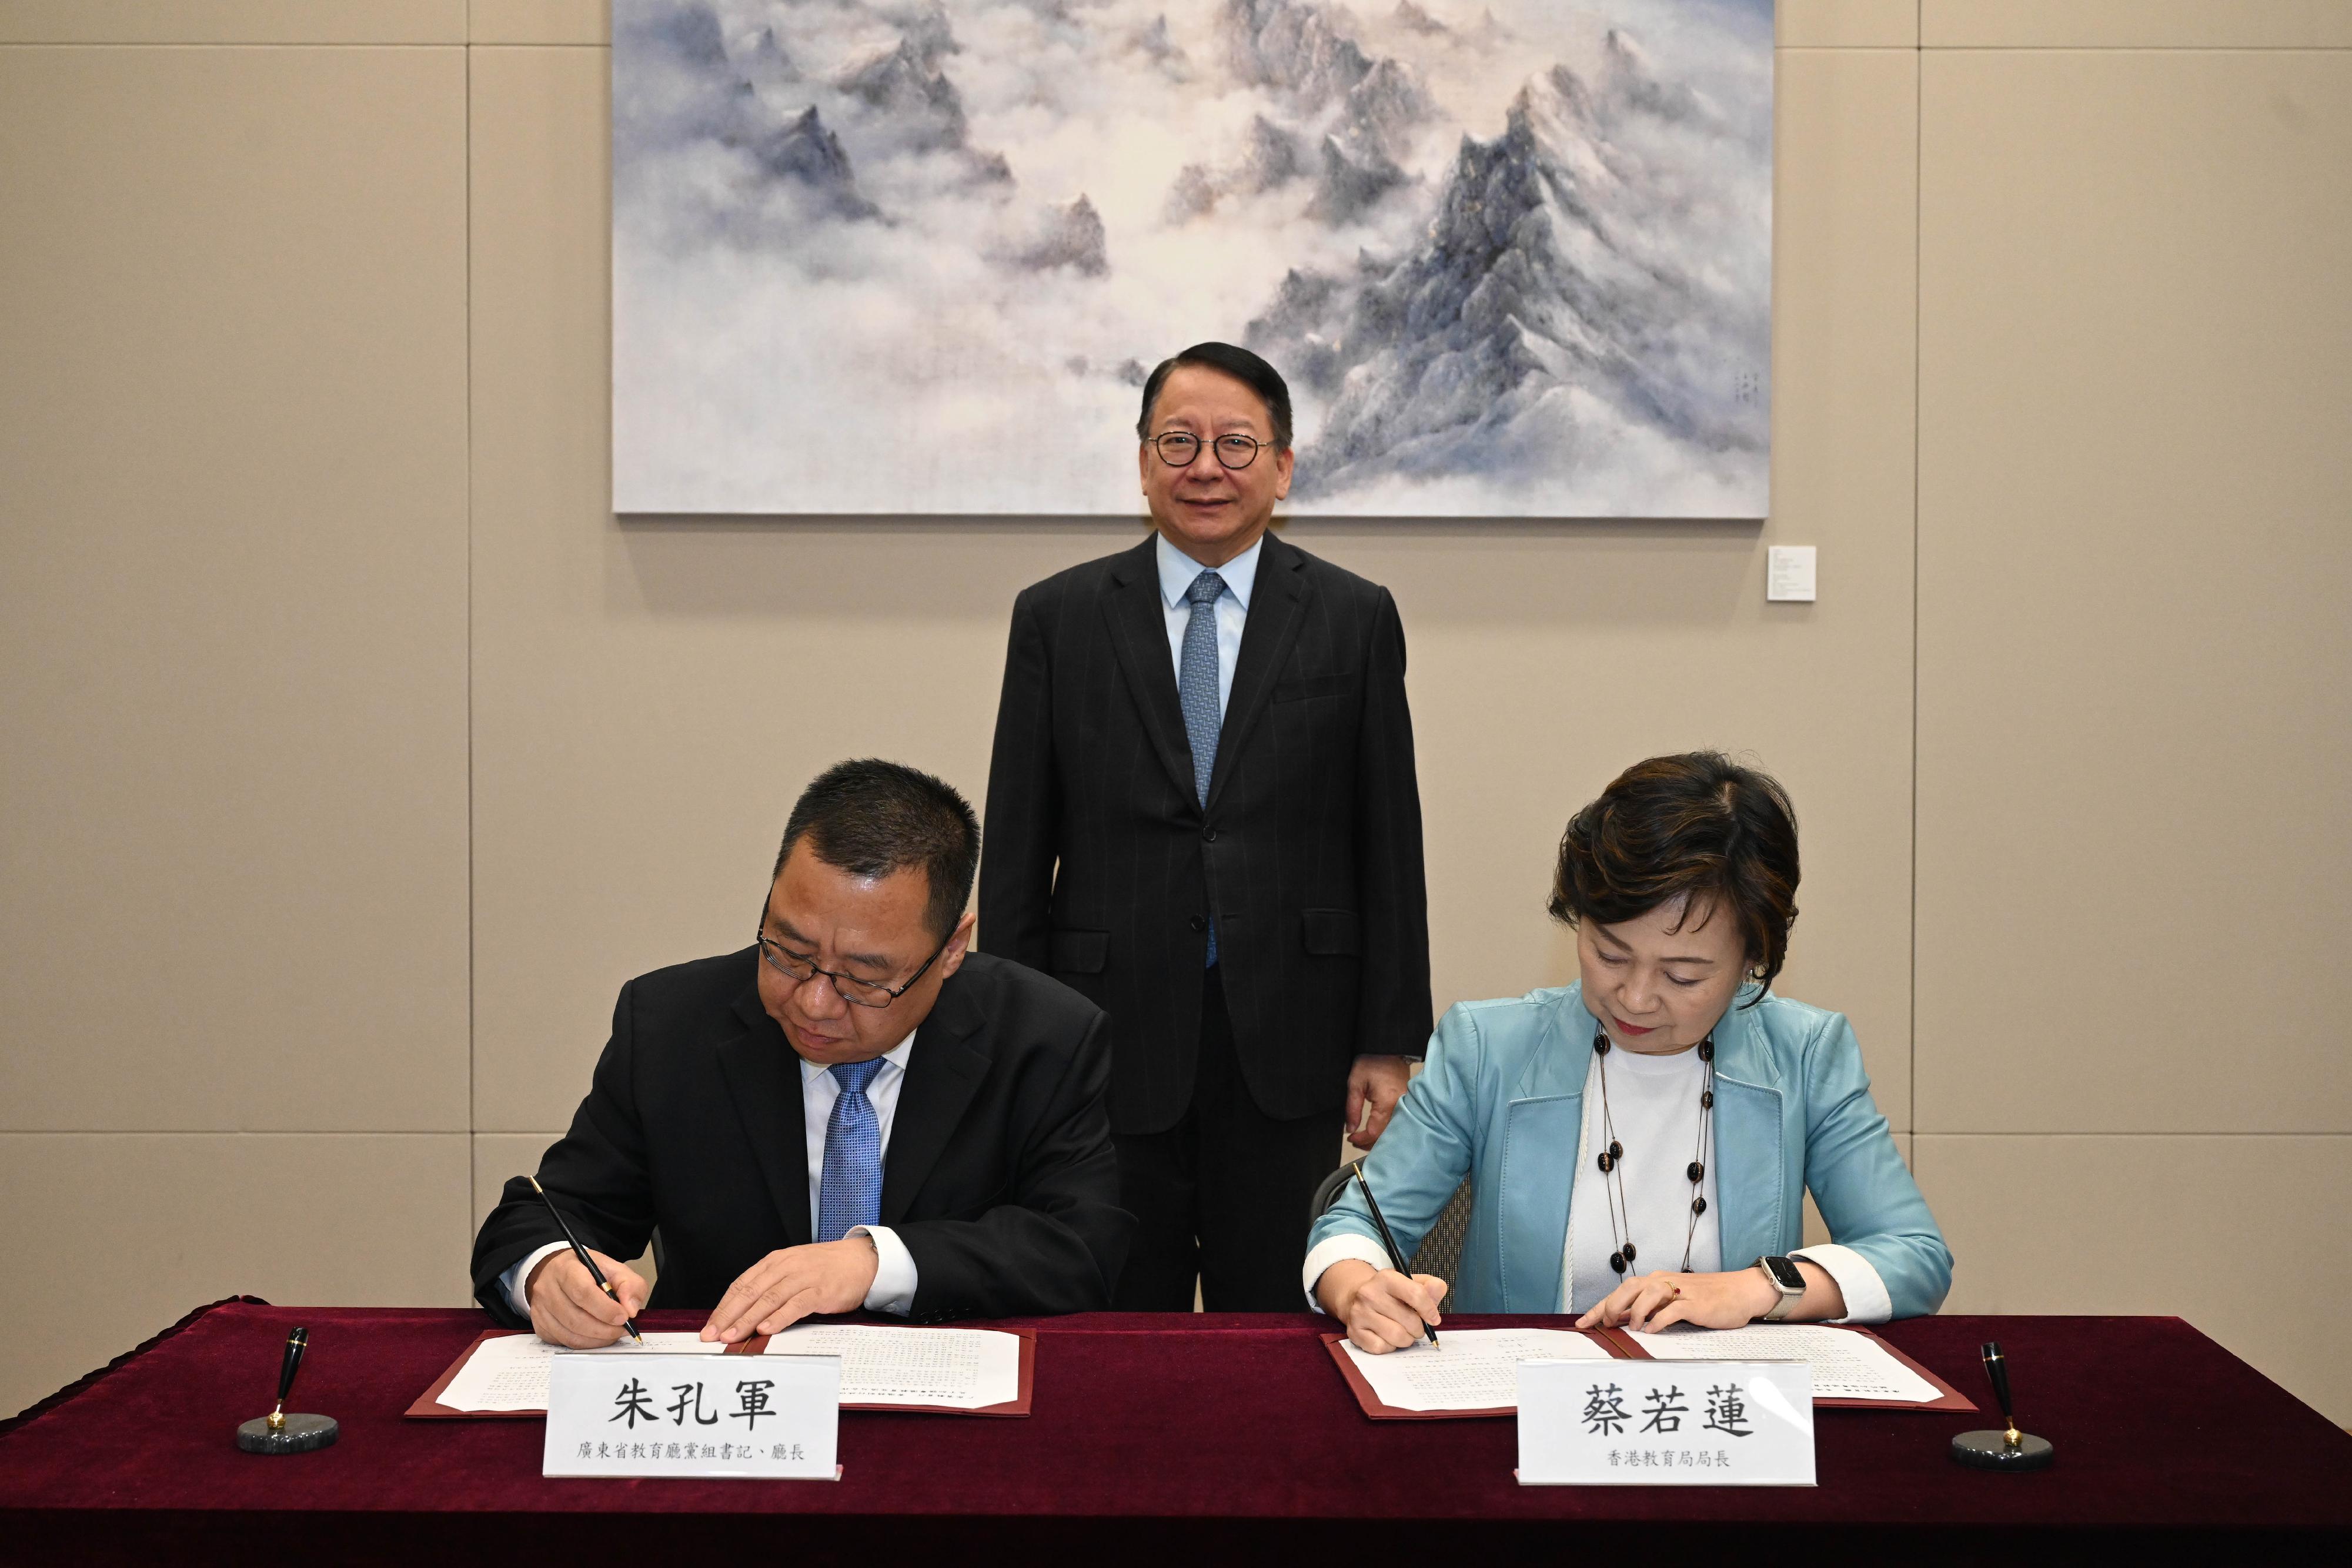 The Education Bureau of the Government of the Hong Kong Special Administrative Region today (August 24) signed with the Department of Education of Guangdong Province the Framework Agreement on Strengthening Education Exchange and Co-operation between Guangdong and Hong Kong. Photo shows the Chief Secretary for Administration, Mr Chan Kwok-ki (back row), witnessing the Secretary for Education, Dr Choi Yuk-lin (front row, right), and the Director-General of the Department of Education of Guangdong Province, Dr Zhu Kongjun (front row, left), signing the agreement. 